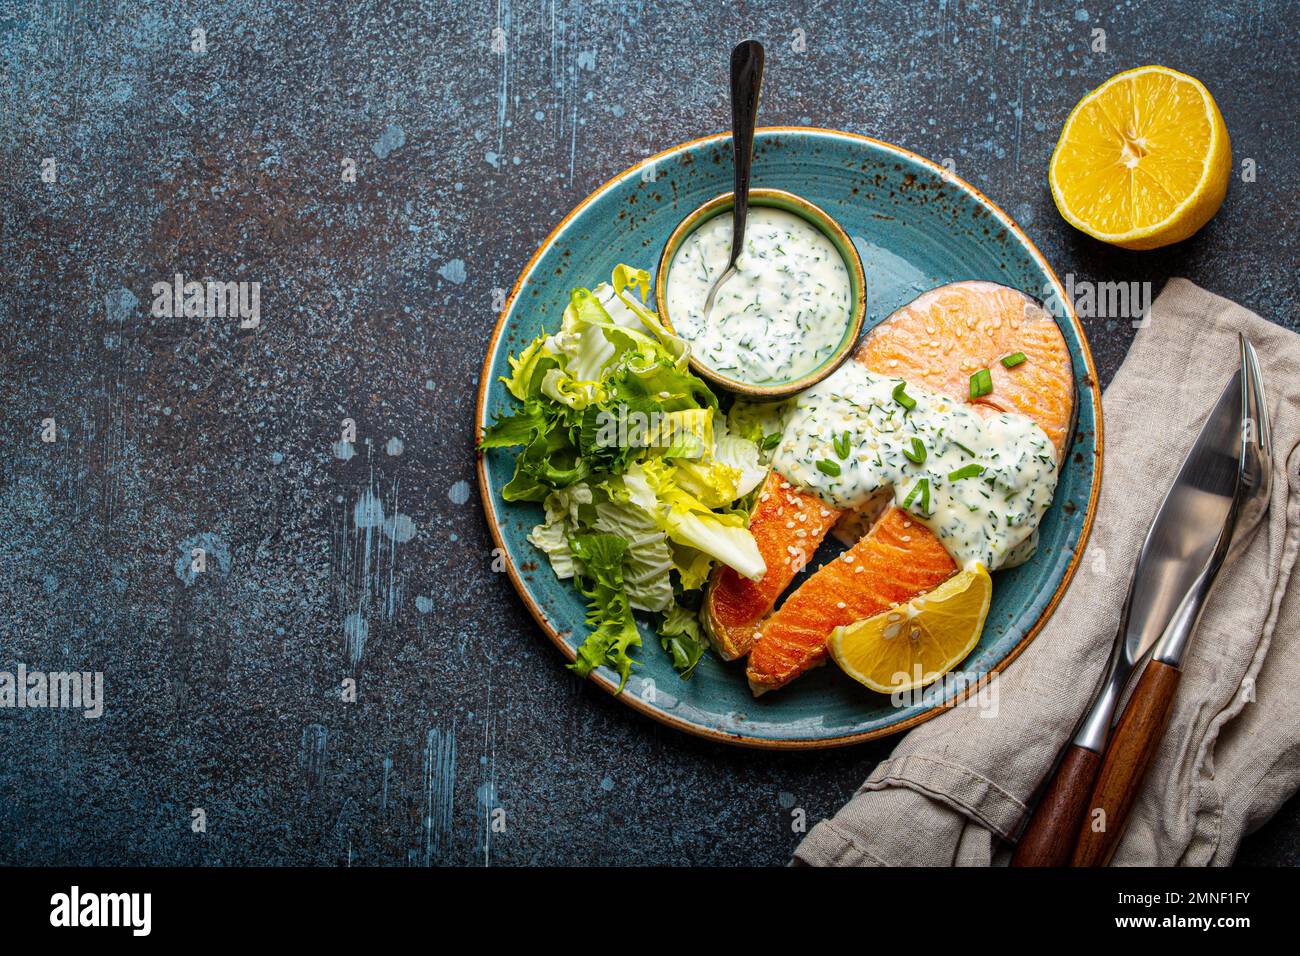 Healthy food meal cooked grilled salmon steaks with white dill sauce ...